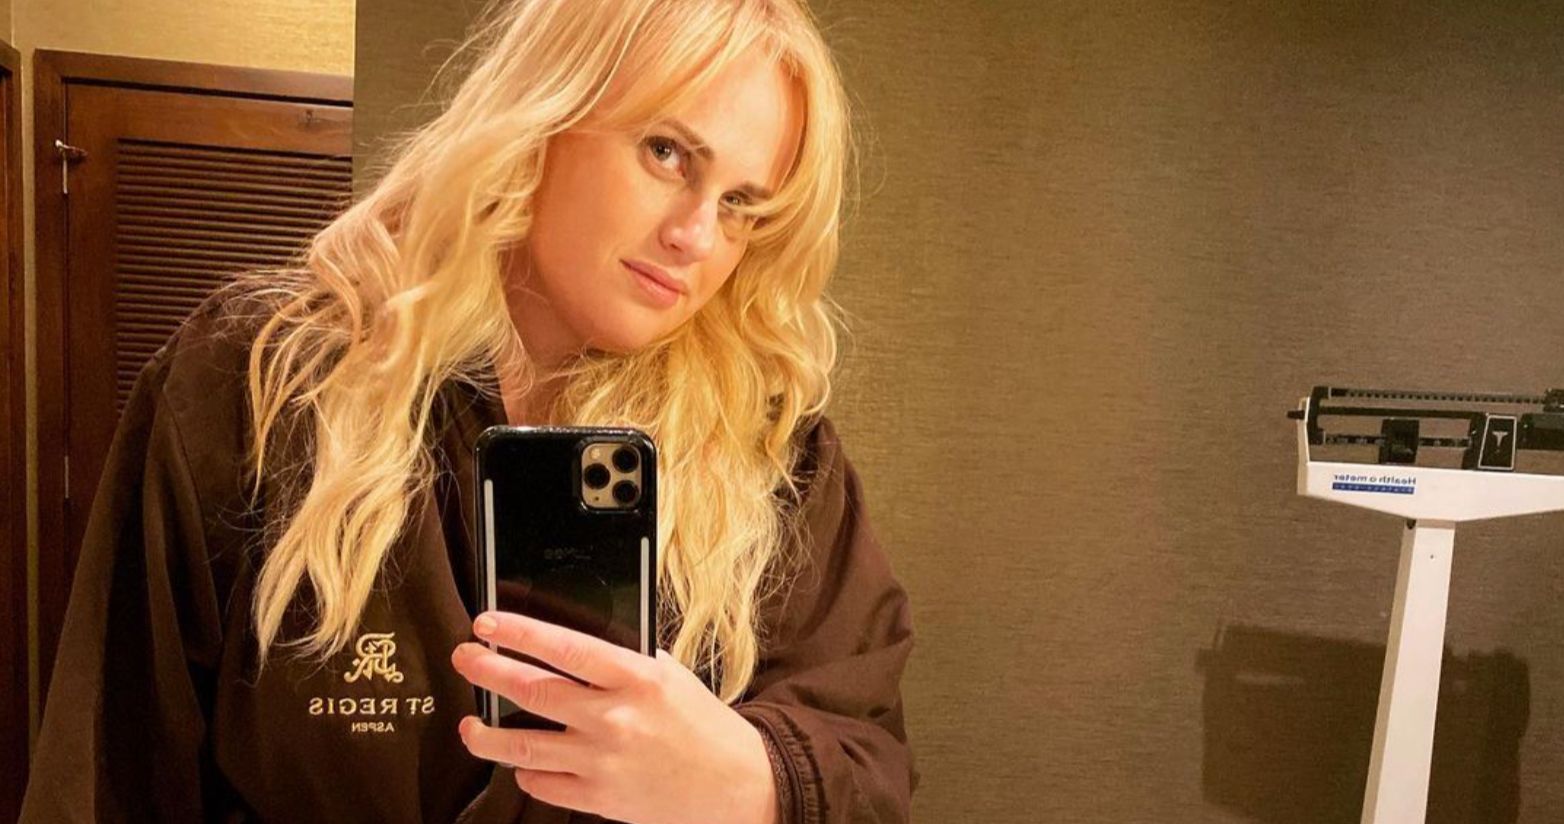 Rebel Wilson Says Weight Loss Has People Treating Her Differently